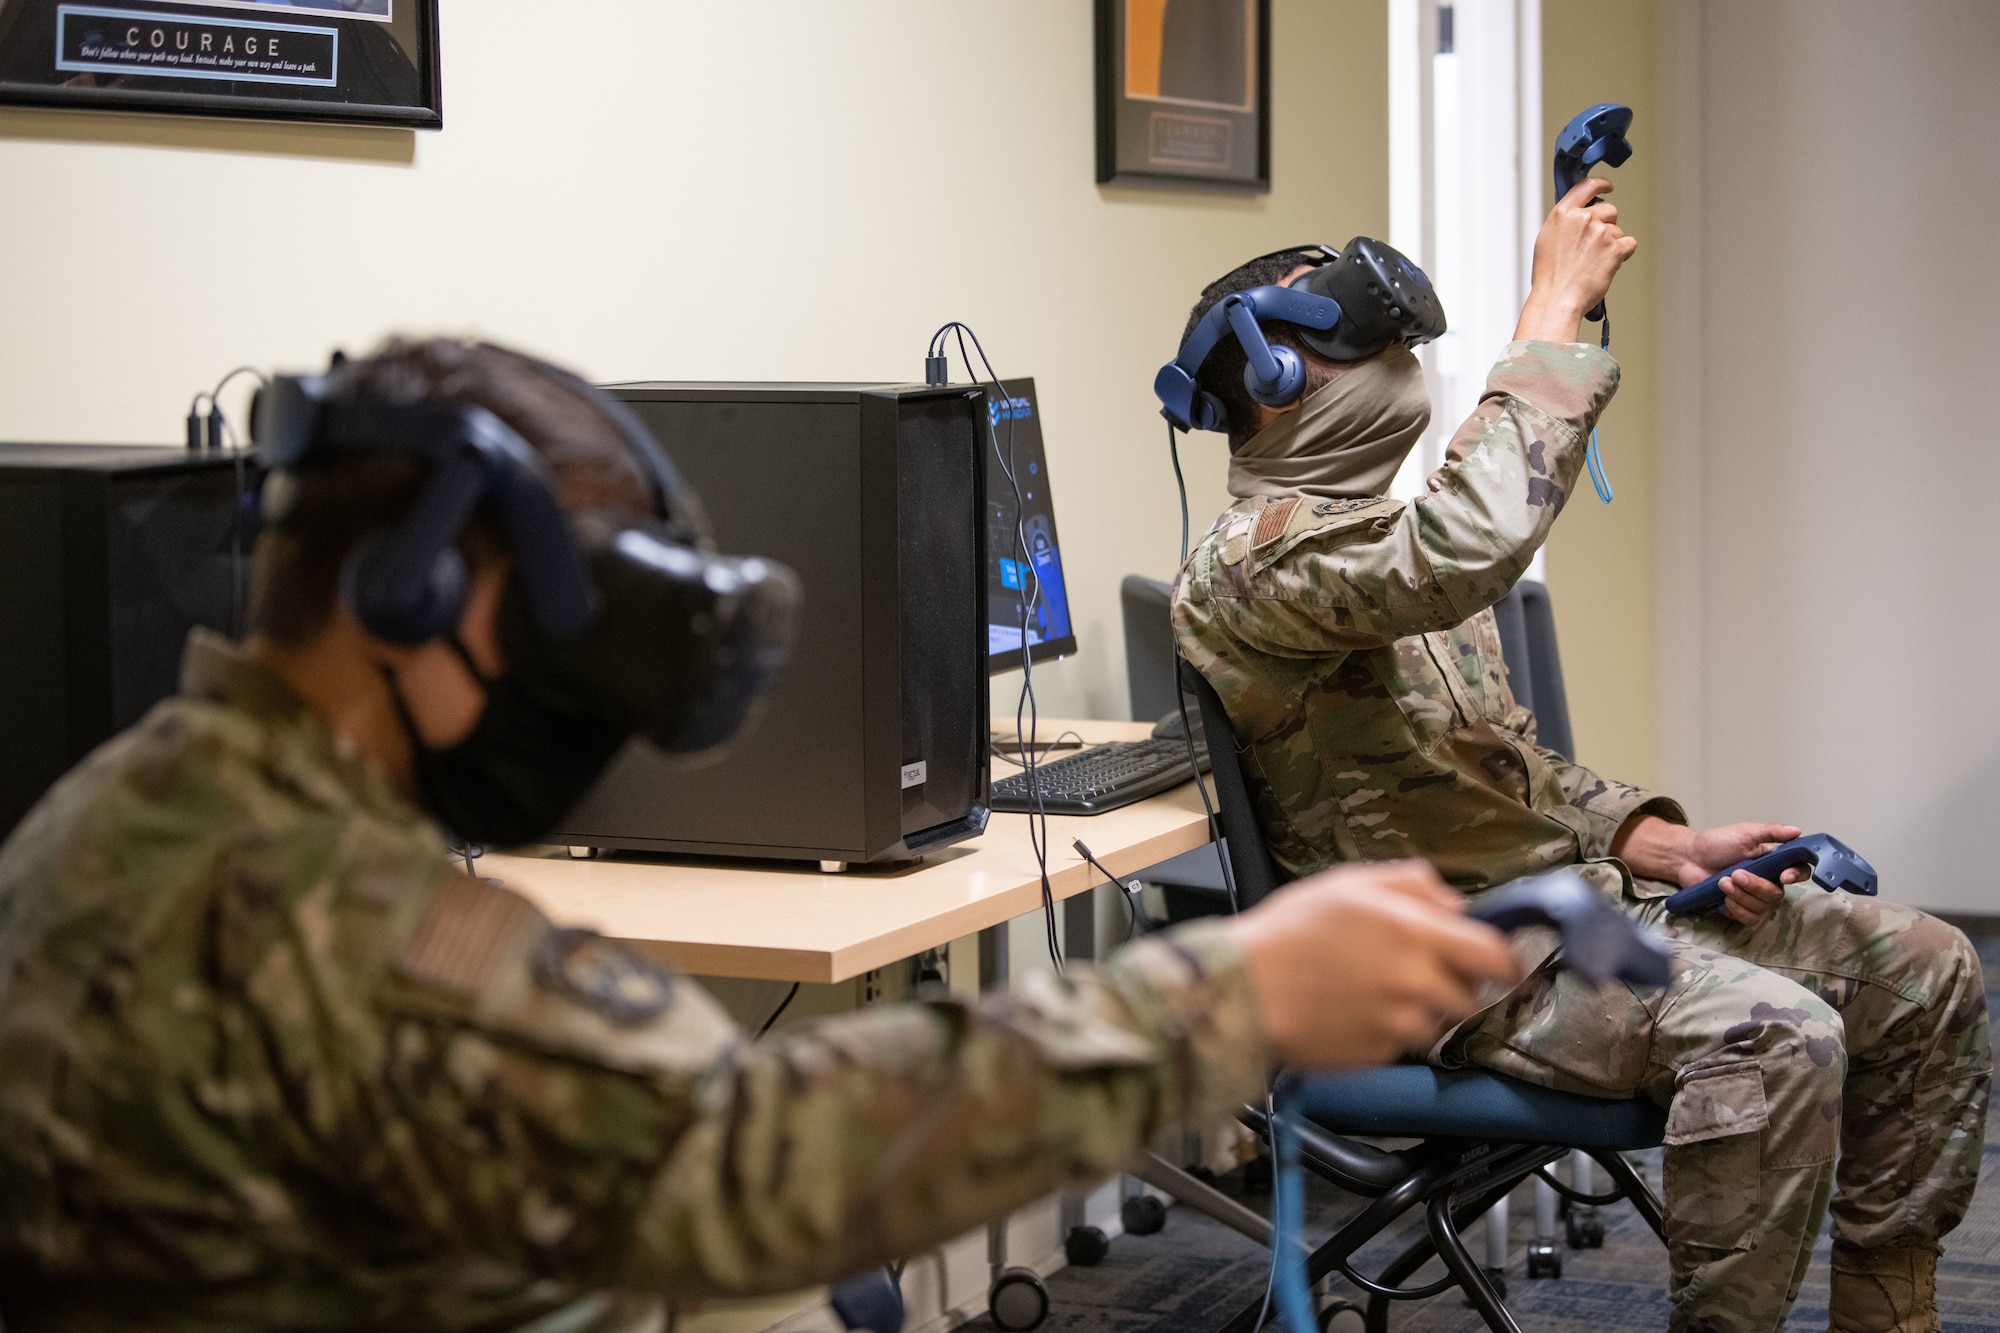 U.S. Air Force Senior Airman David Koon, left, and U.S. Air Force Senior Airman Matthew Brandon-Sellers, right, 1st Special Operations Maintenance Squadron wheel and tire journeymen, complete various tasks using virtual reality capabilities